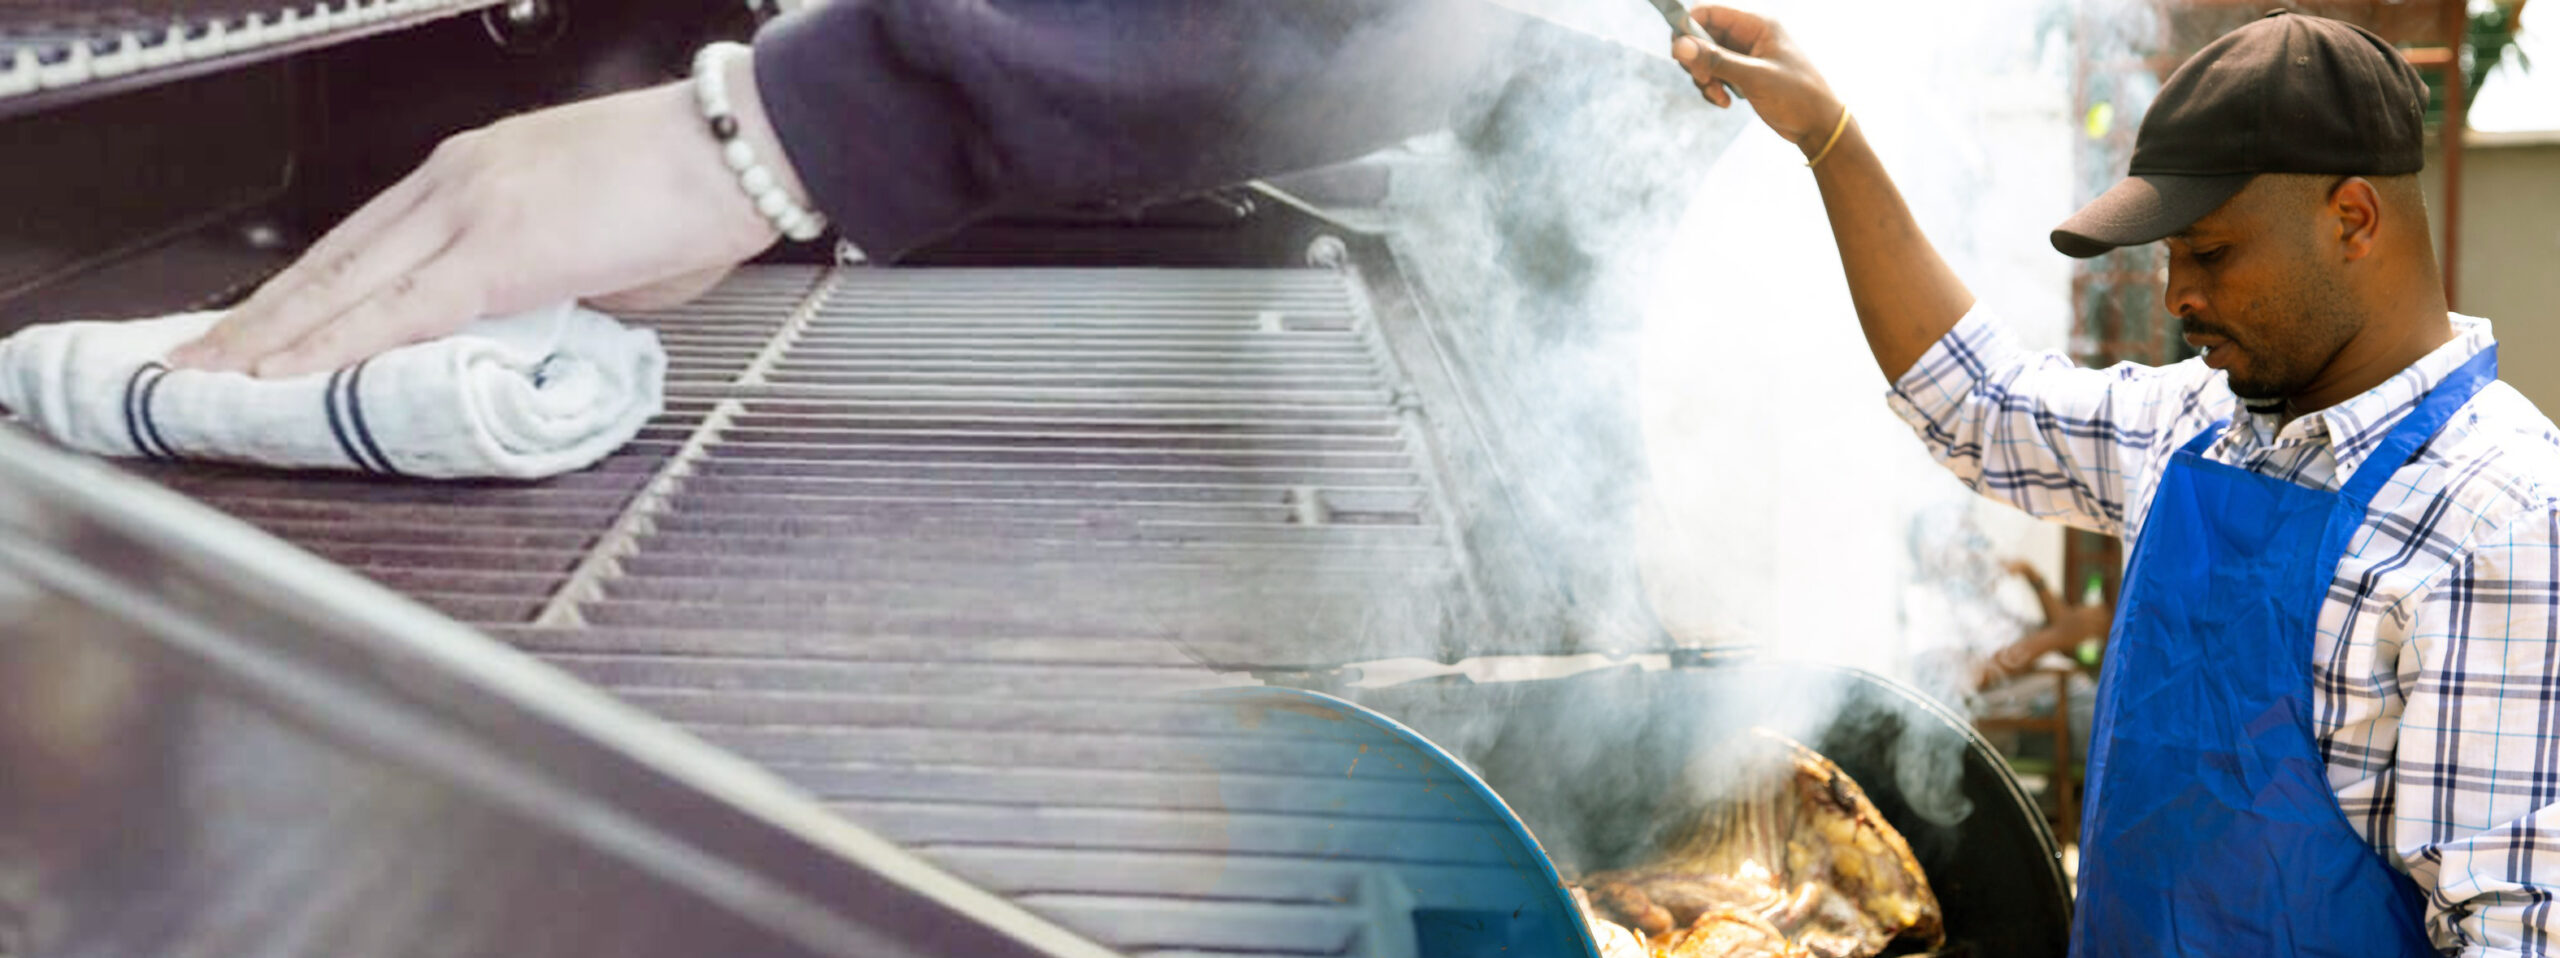 Cleaning The BBQ Grill With Baking Soda